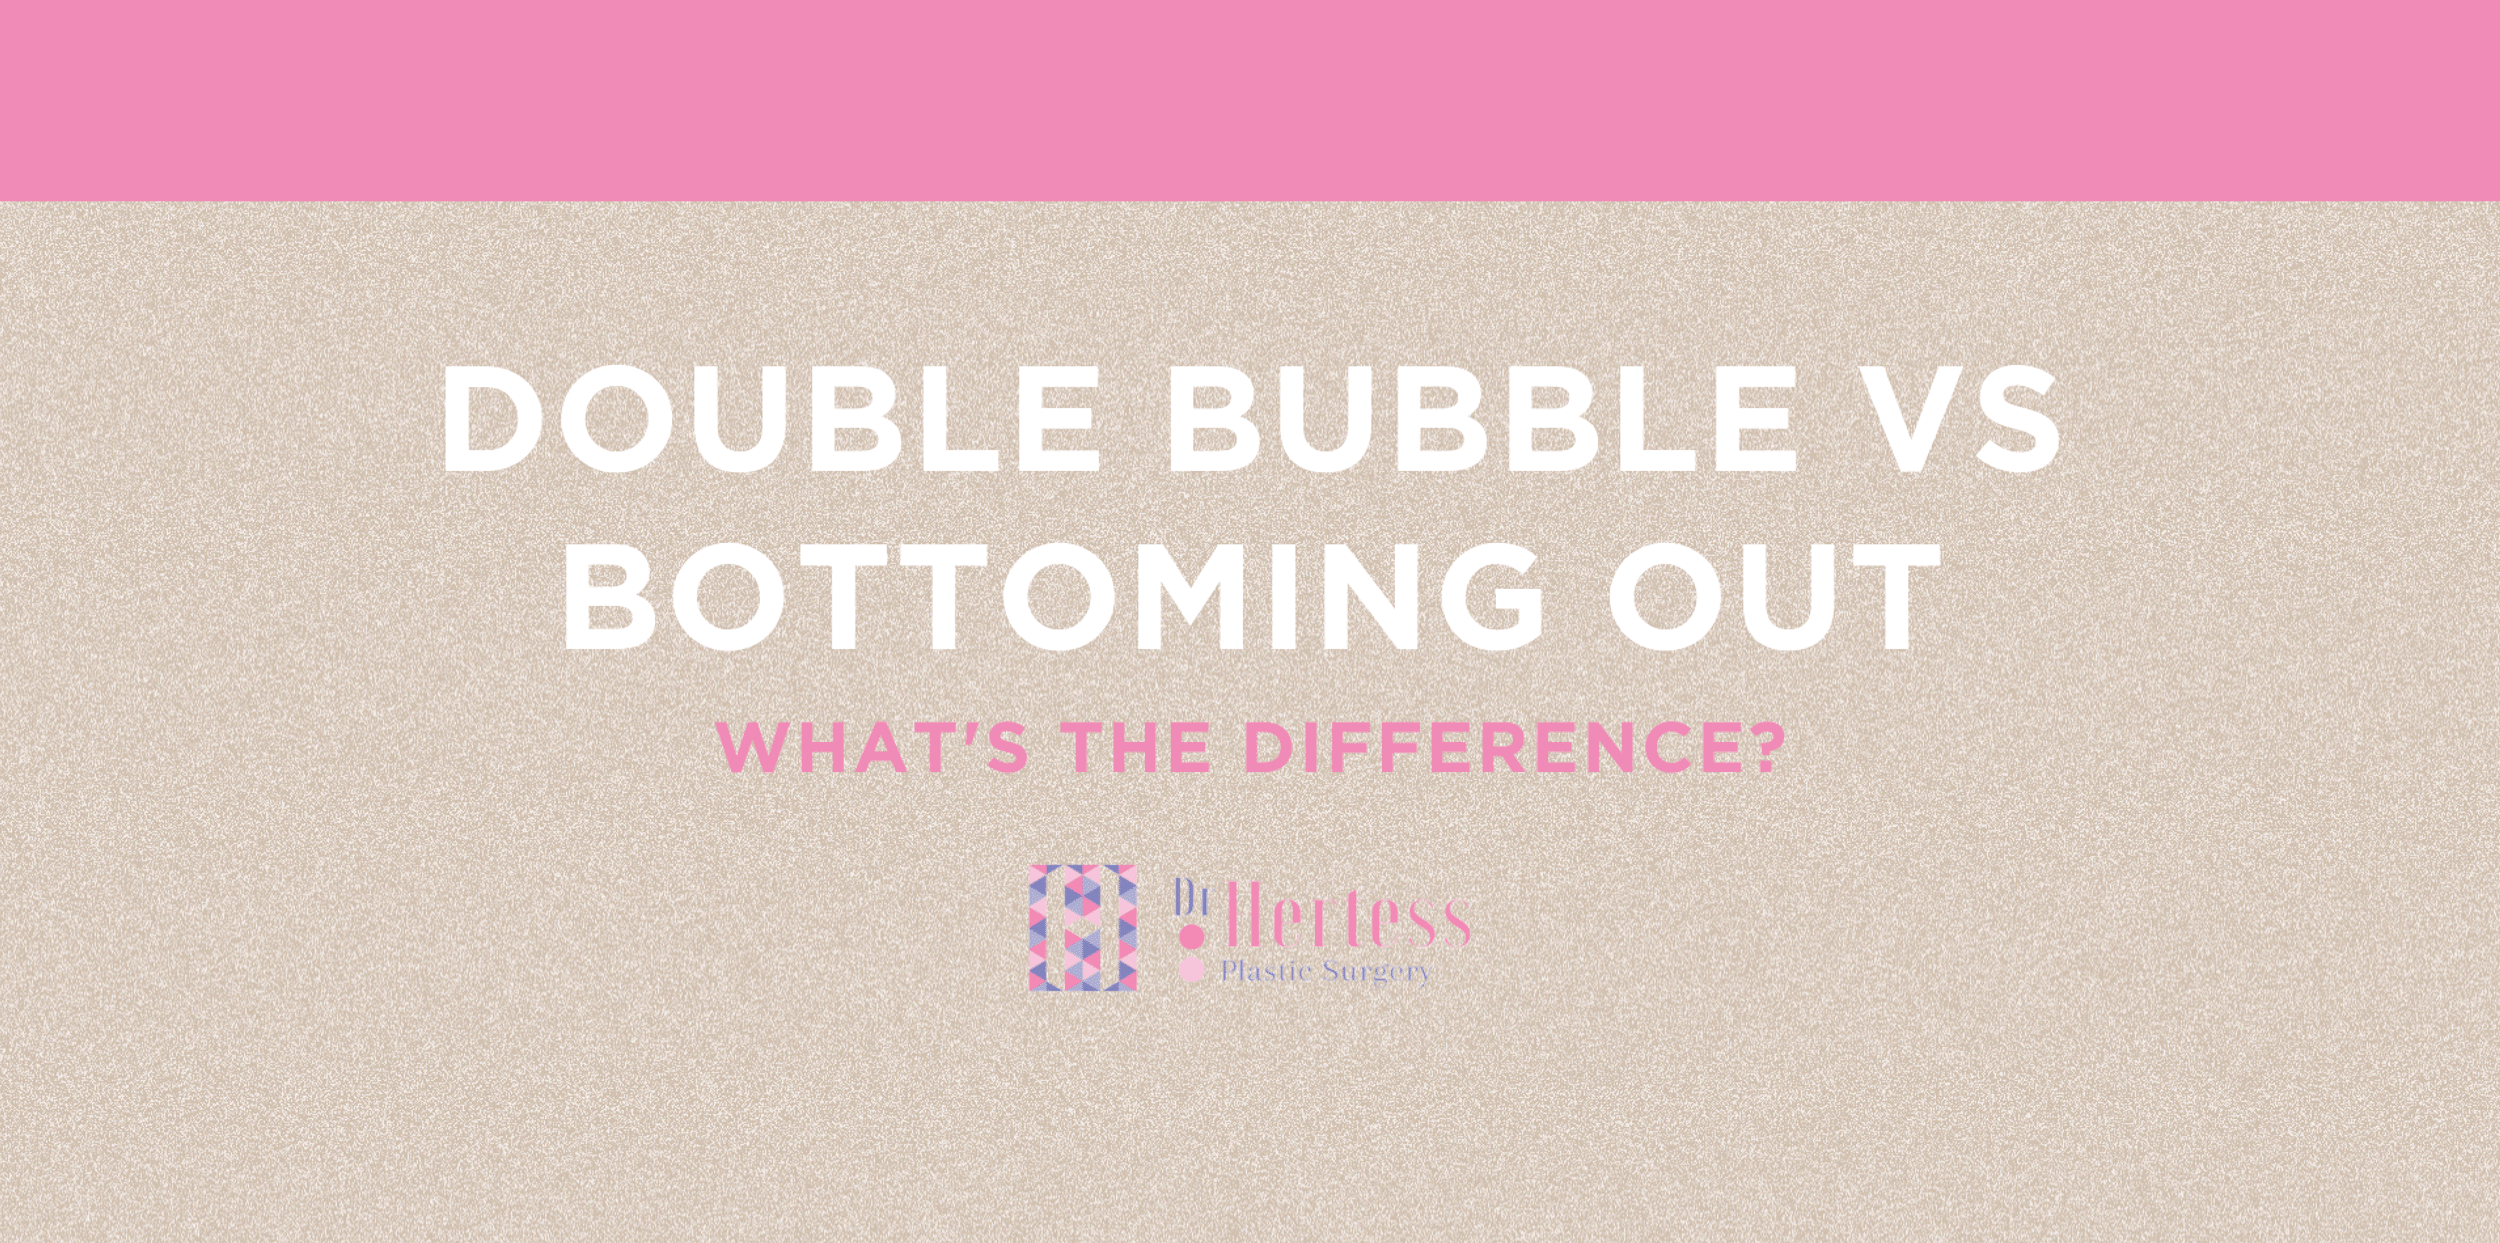 Double Bubble vs Bottoming Out: What's the Difference?